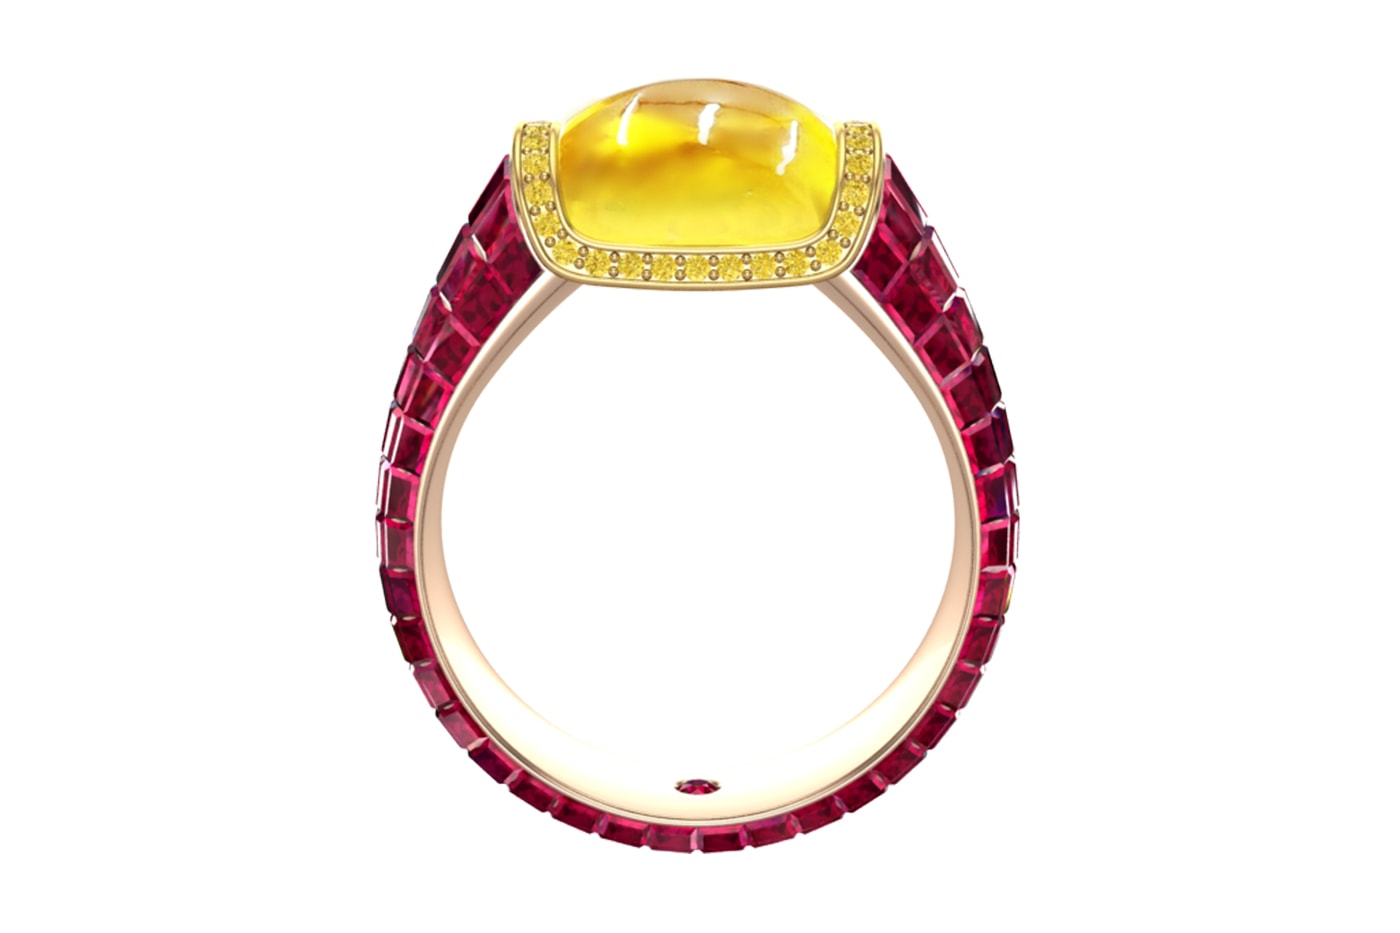 Taylor & Hart Haribo Inspired Cabochon Diamond Ruby Ring rubies invisible set sapphire rings accessories diamonds fancy yellow london jewelry 